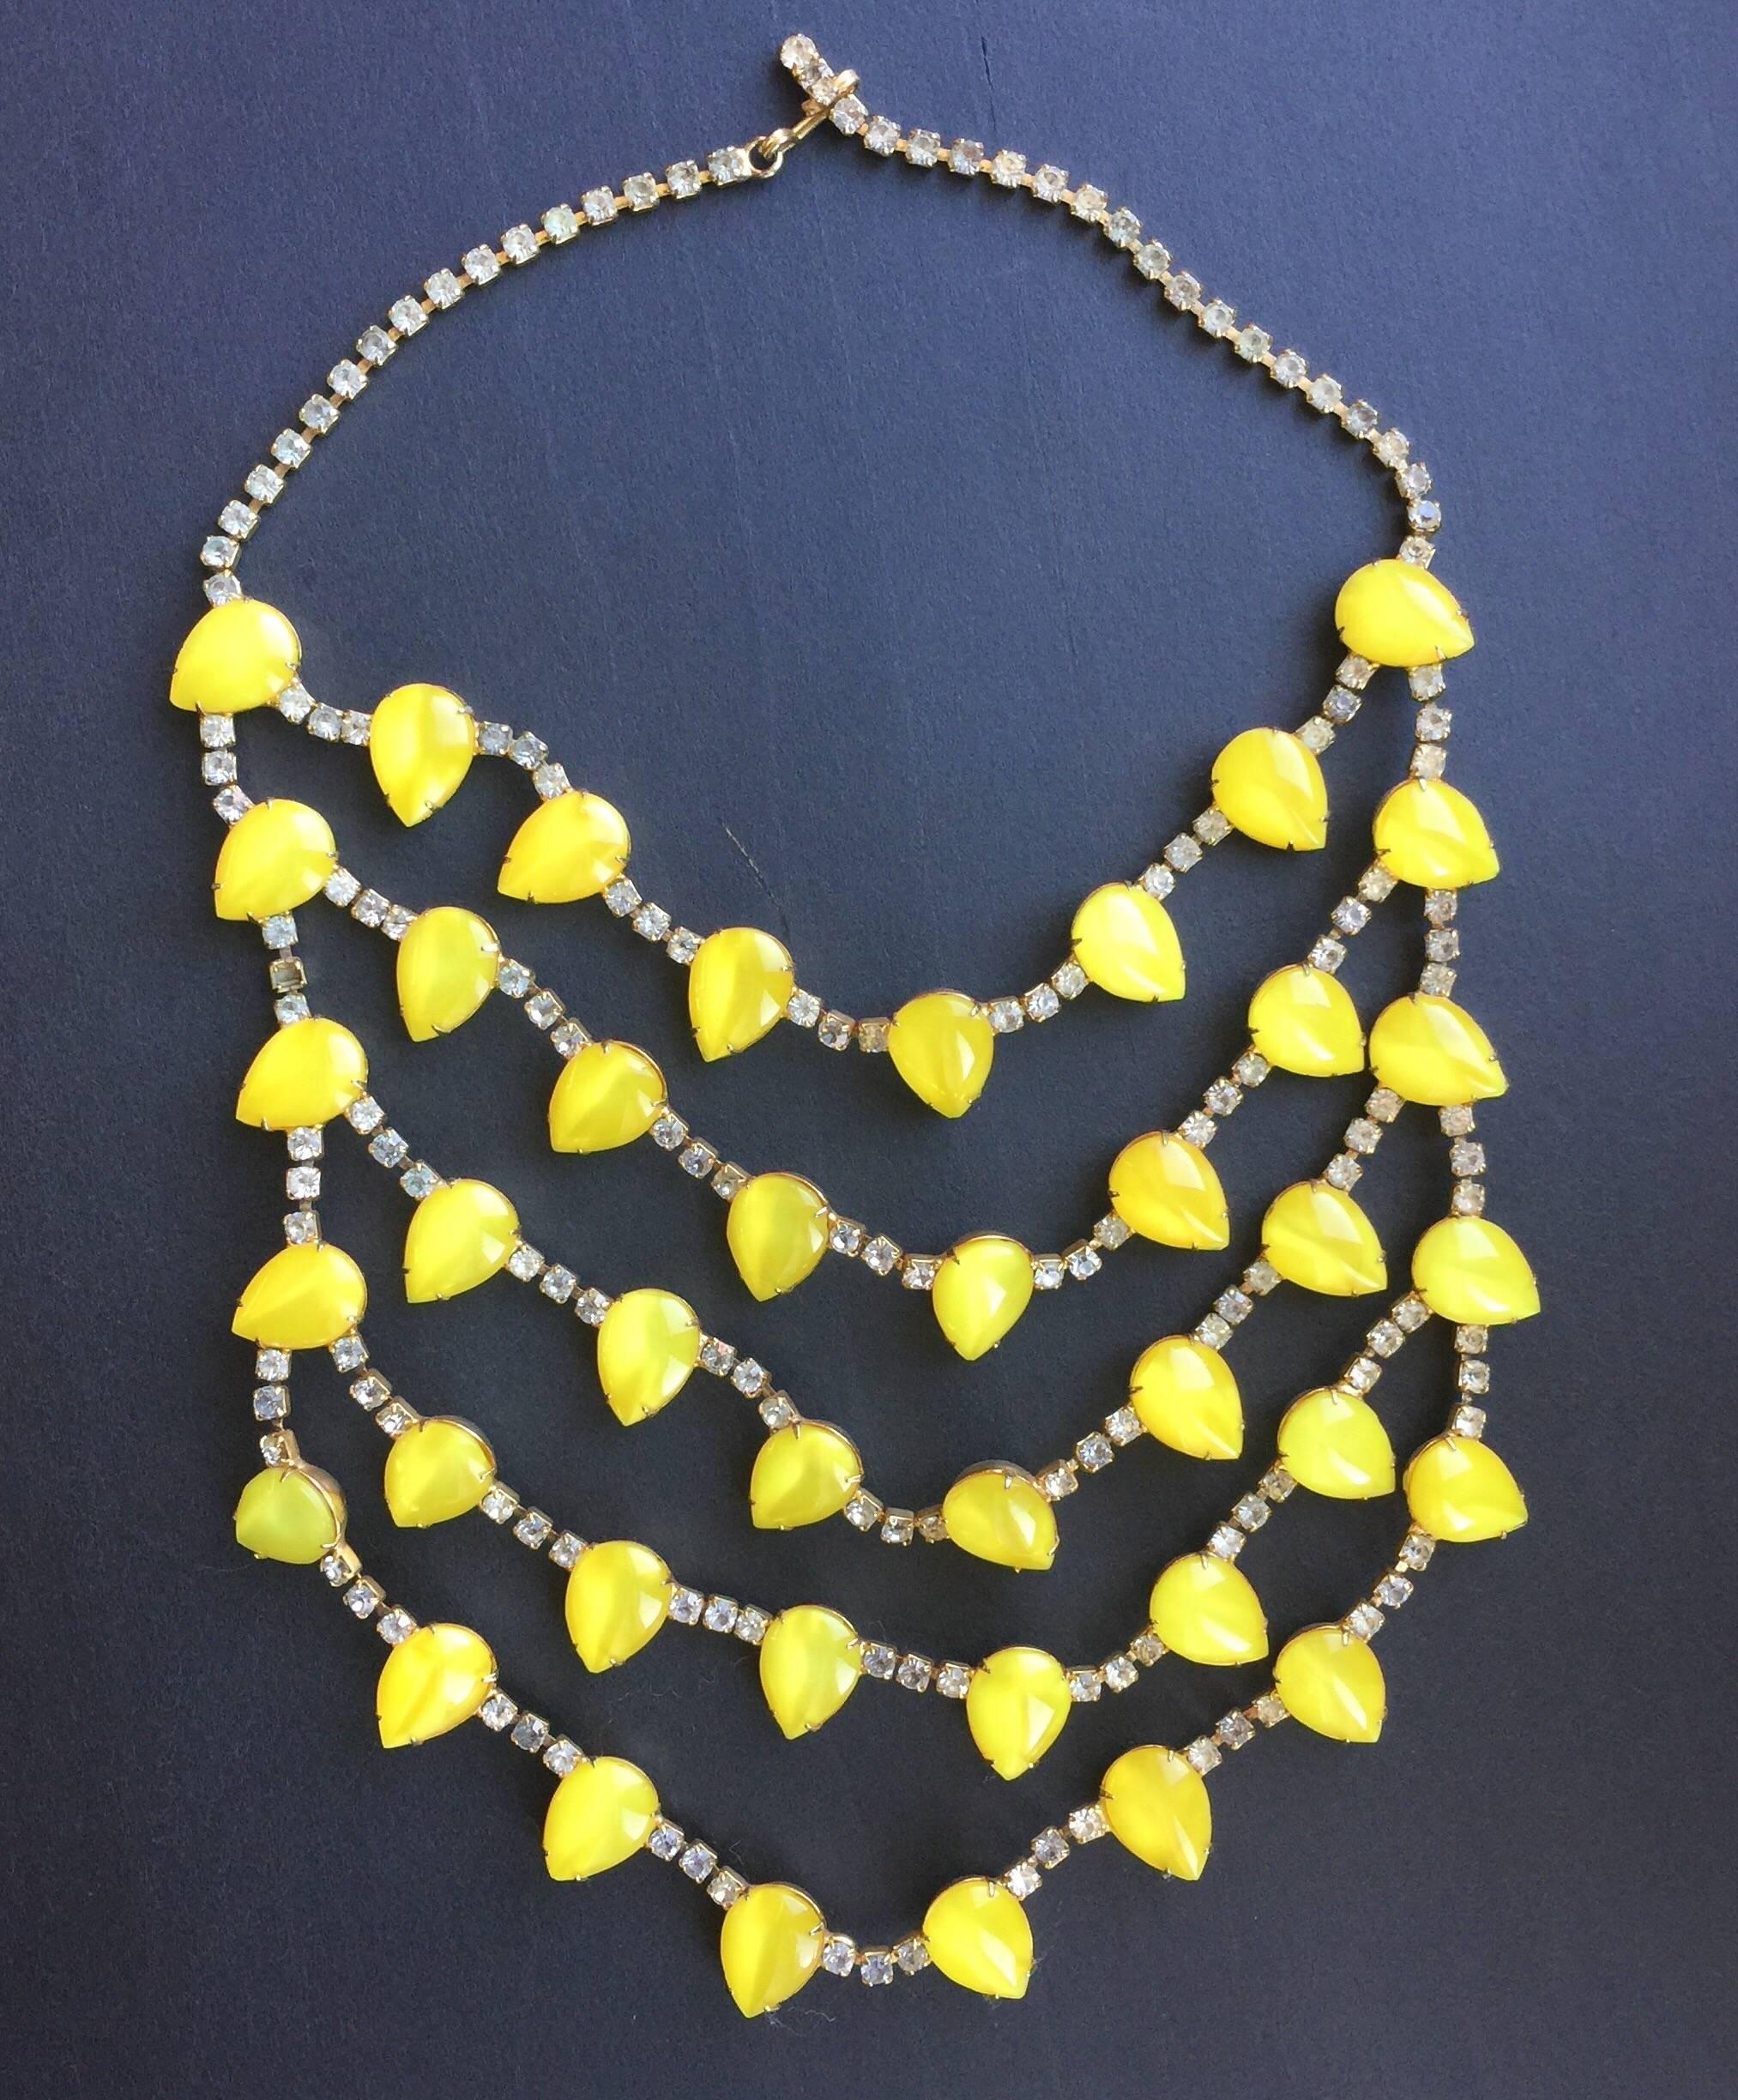 This brilliant tiered KJL necklace is made with neon citrine colored stones and crystal. It is from the late 1980s.  This beautiful necklace has 5 tiers of neon citrine colored stones and crystals. The bright yellow stones are teardrop shaped. The